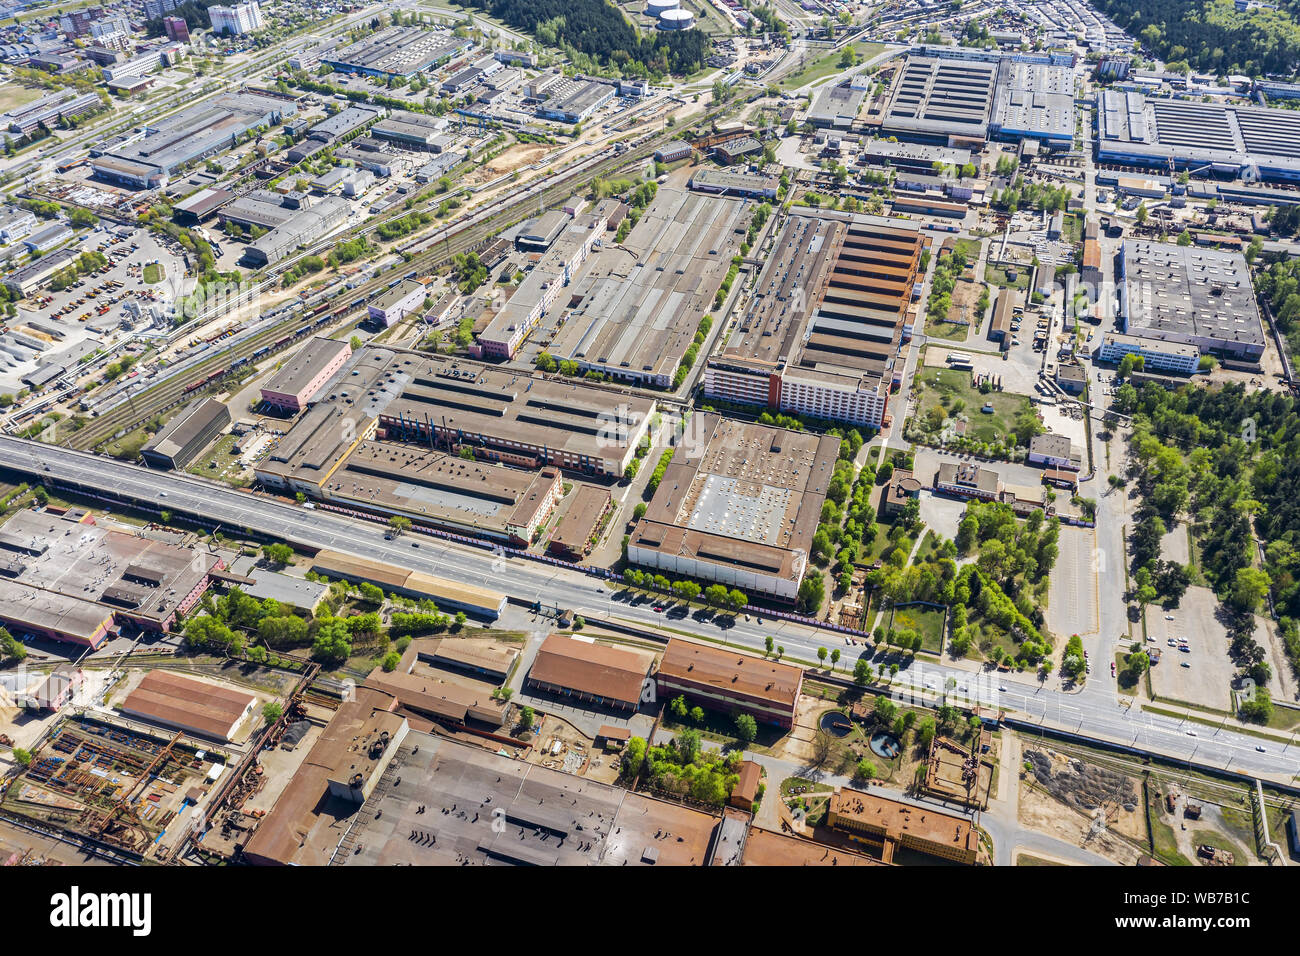 bird eye view of city industrial area. lots of industrial plants and warehouses from above Stock Photo